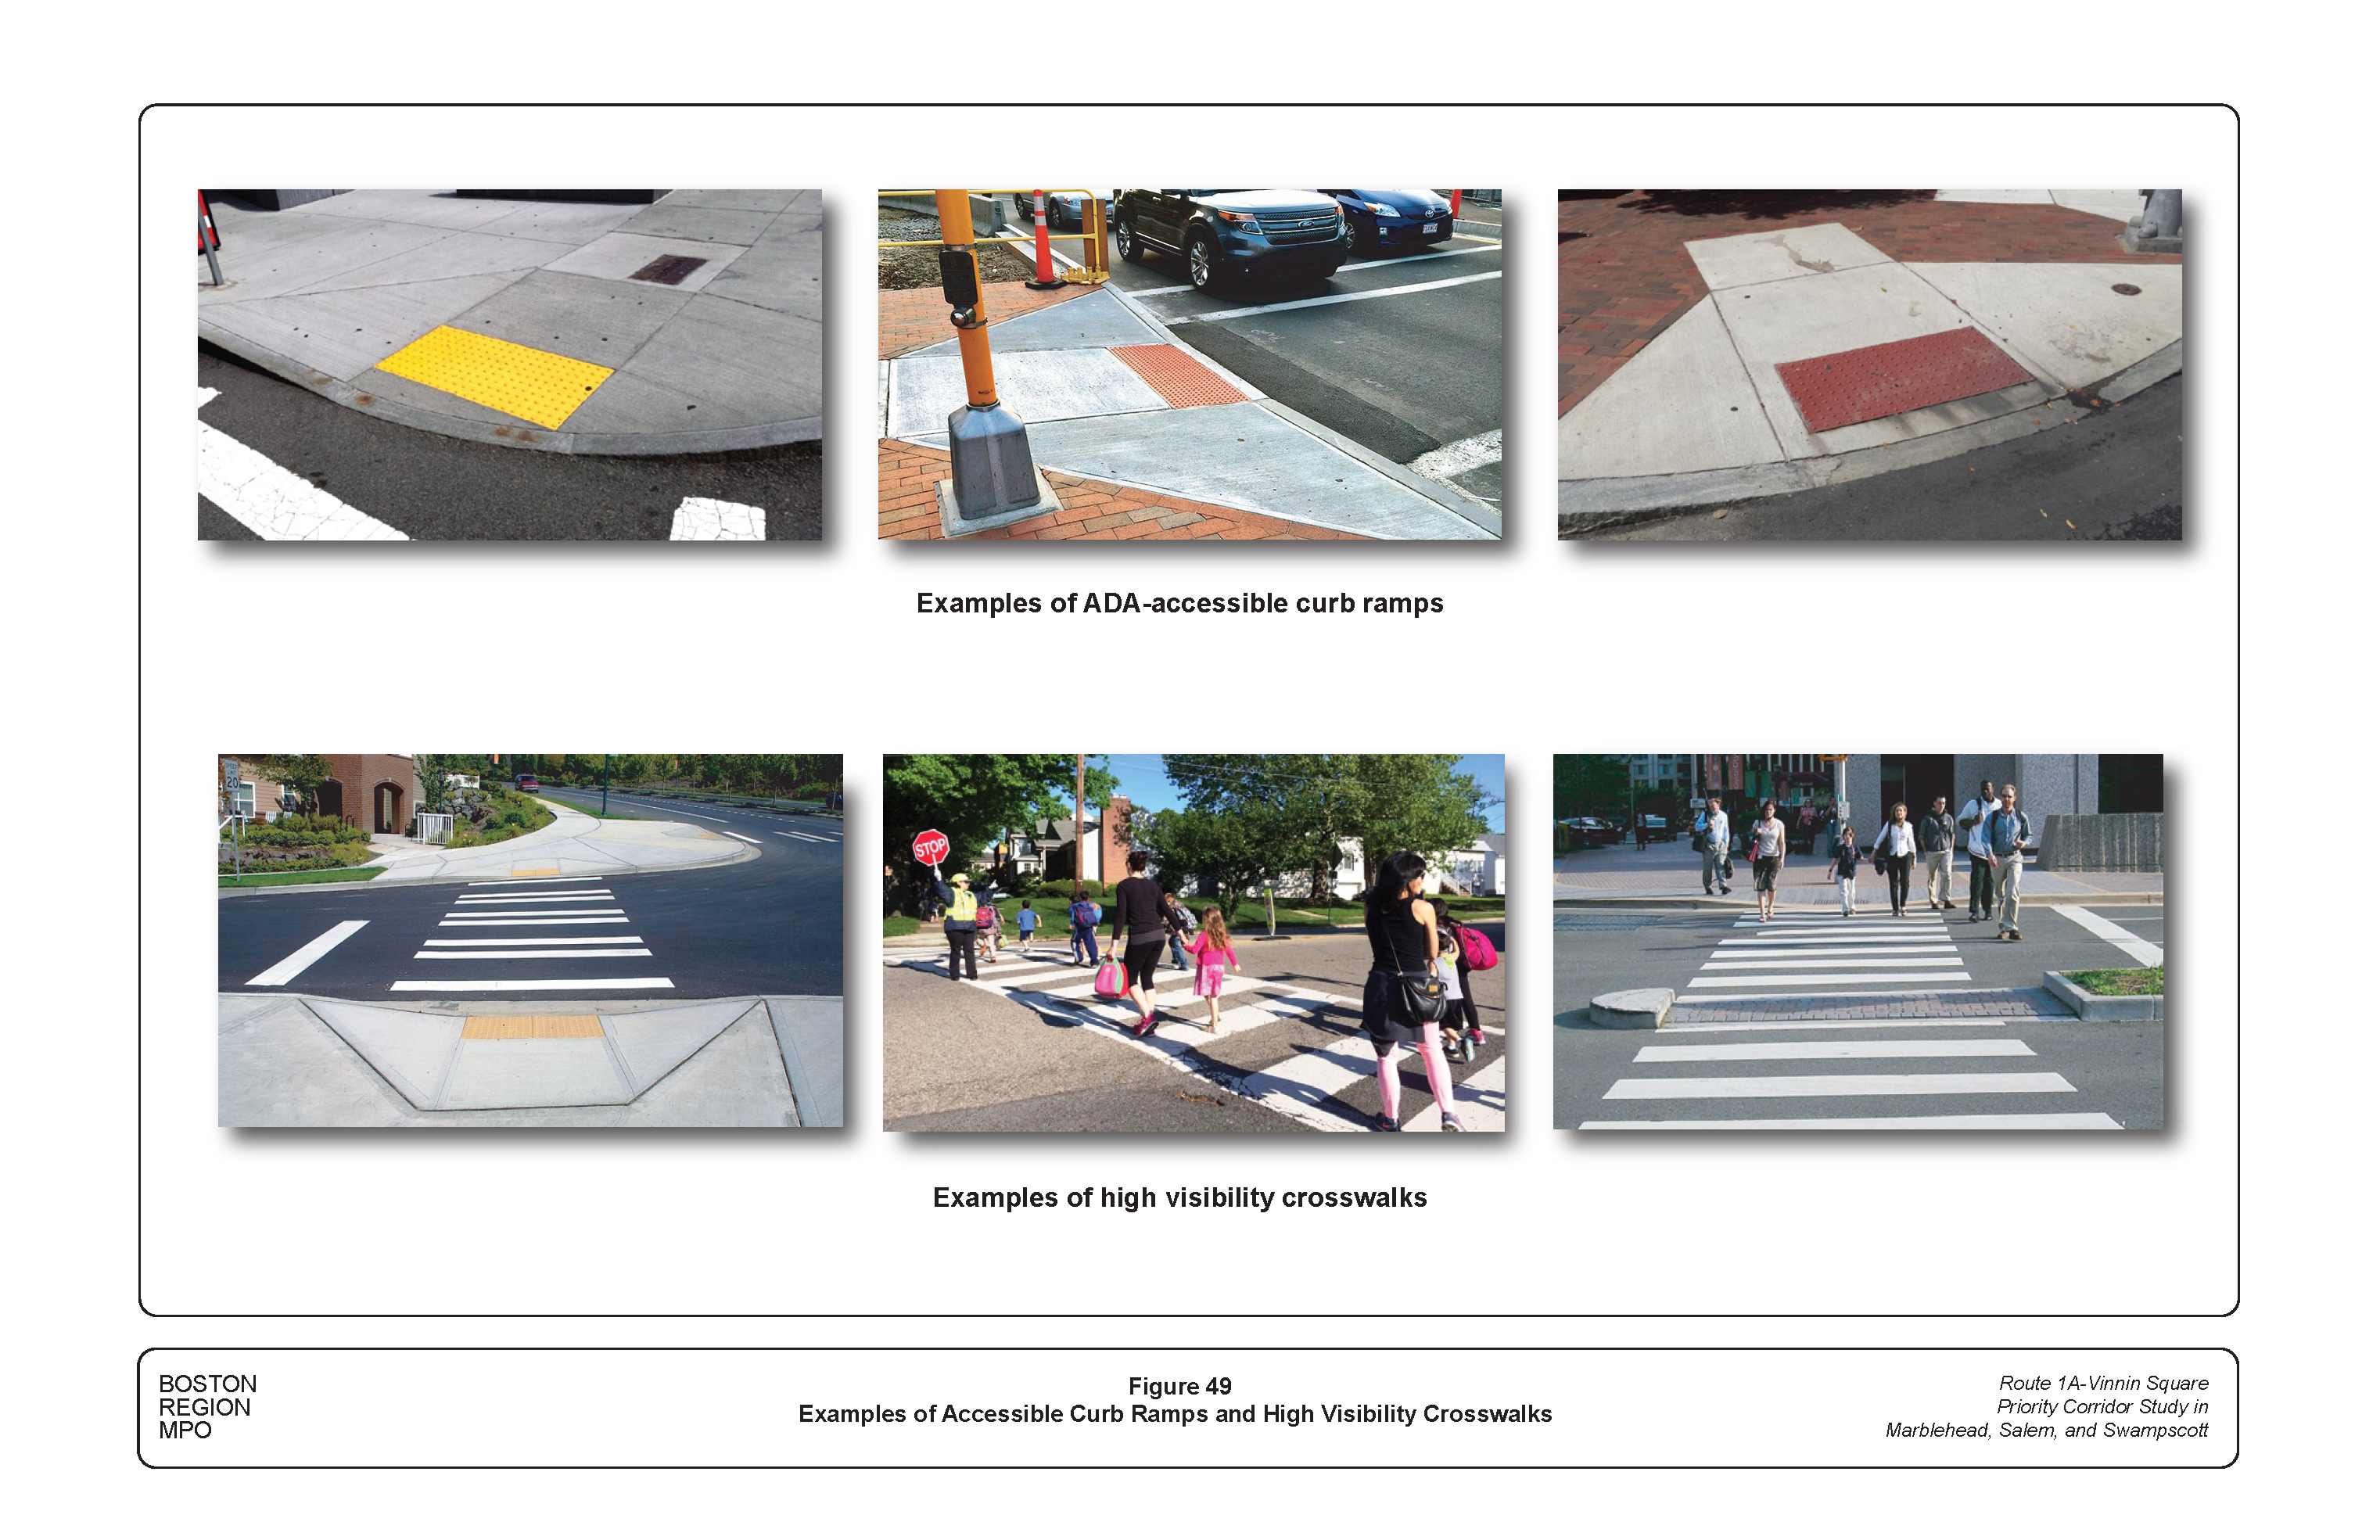 FIGURE 49. Examples of Accessible Curb Ramps and High-Visibility Crosswalks.Figure 49 contains six photographs showing examples of accessible curb ramps and high visibility crosswalks.